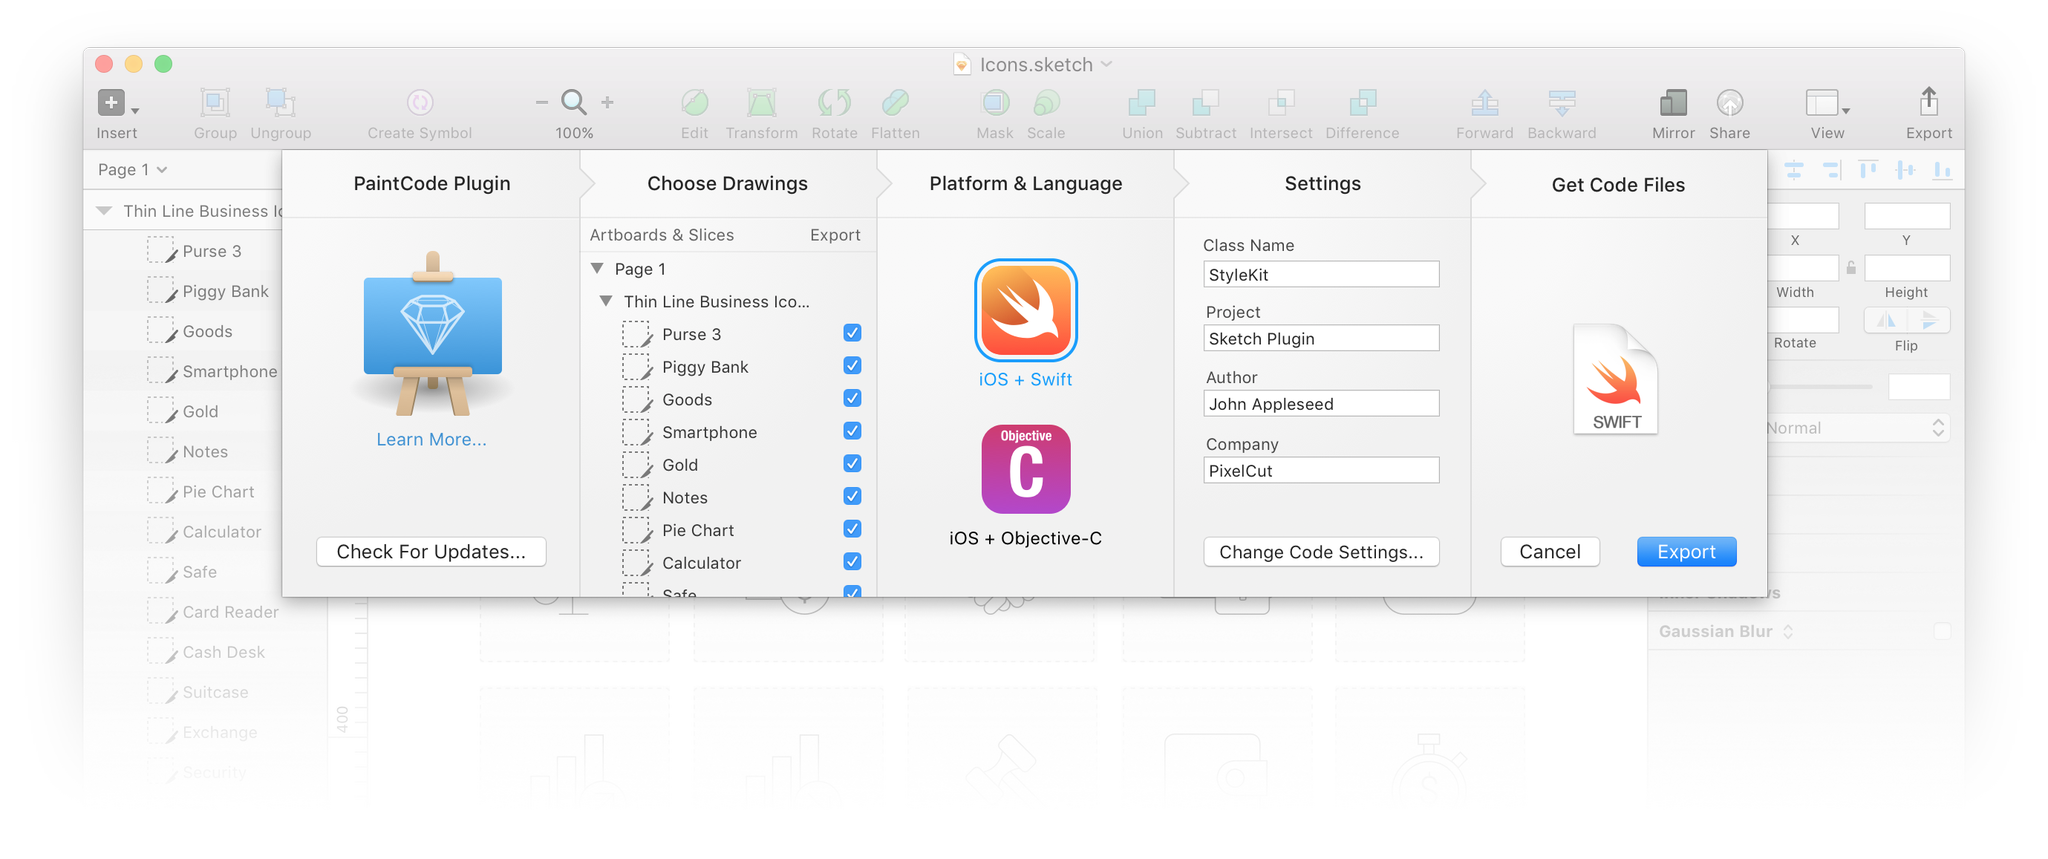 Sketch On Twitter Convert Your Sketch Designs Into Swift Or Objective C With The Paintcode Plugin For Sketch Https T Co Urft6mxtgp Https T Co Mzopg8fkim